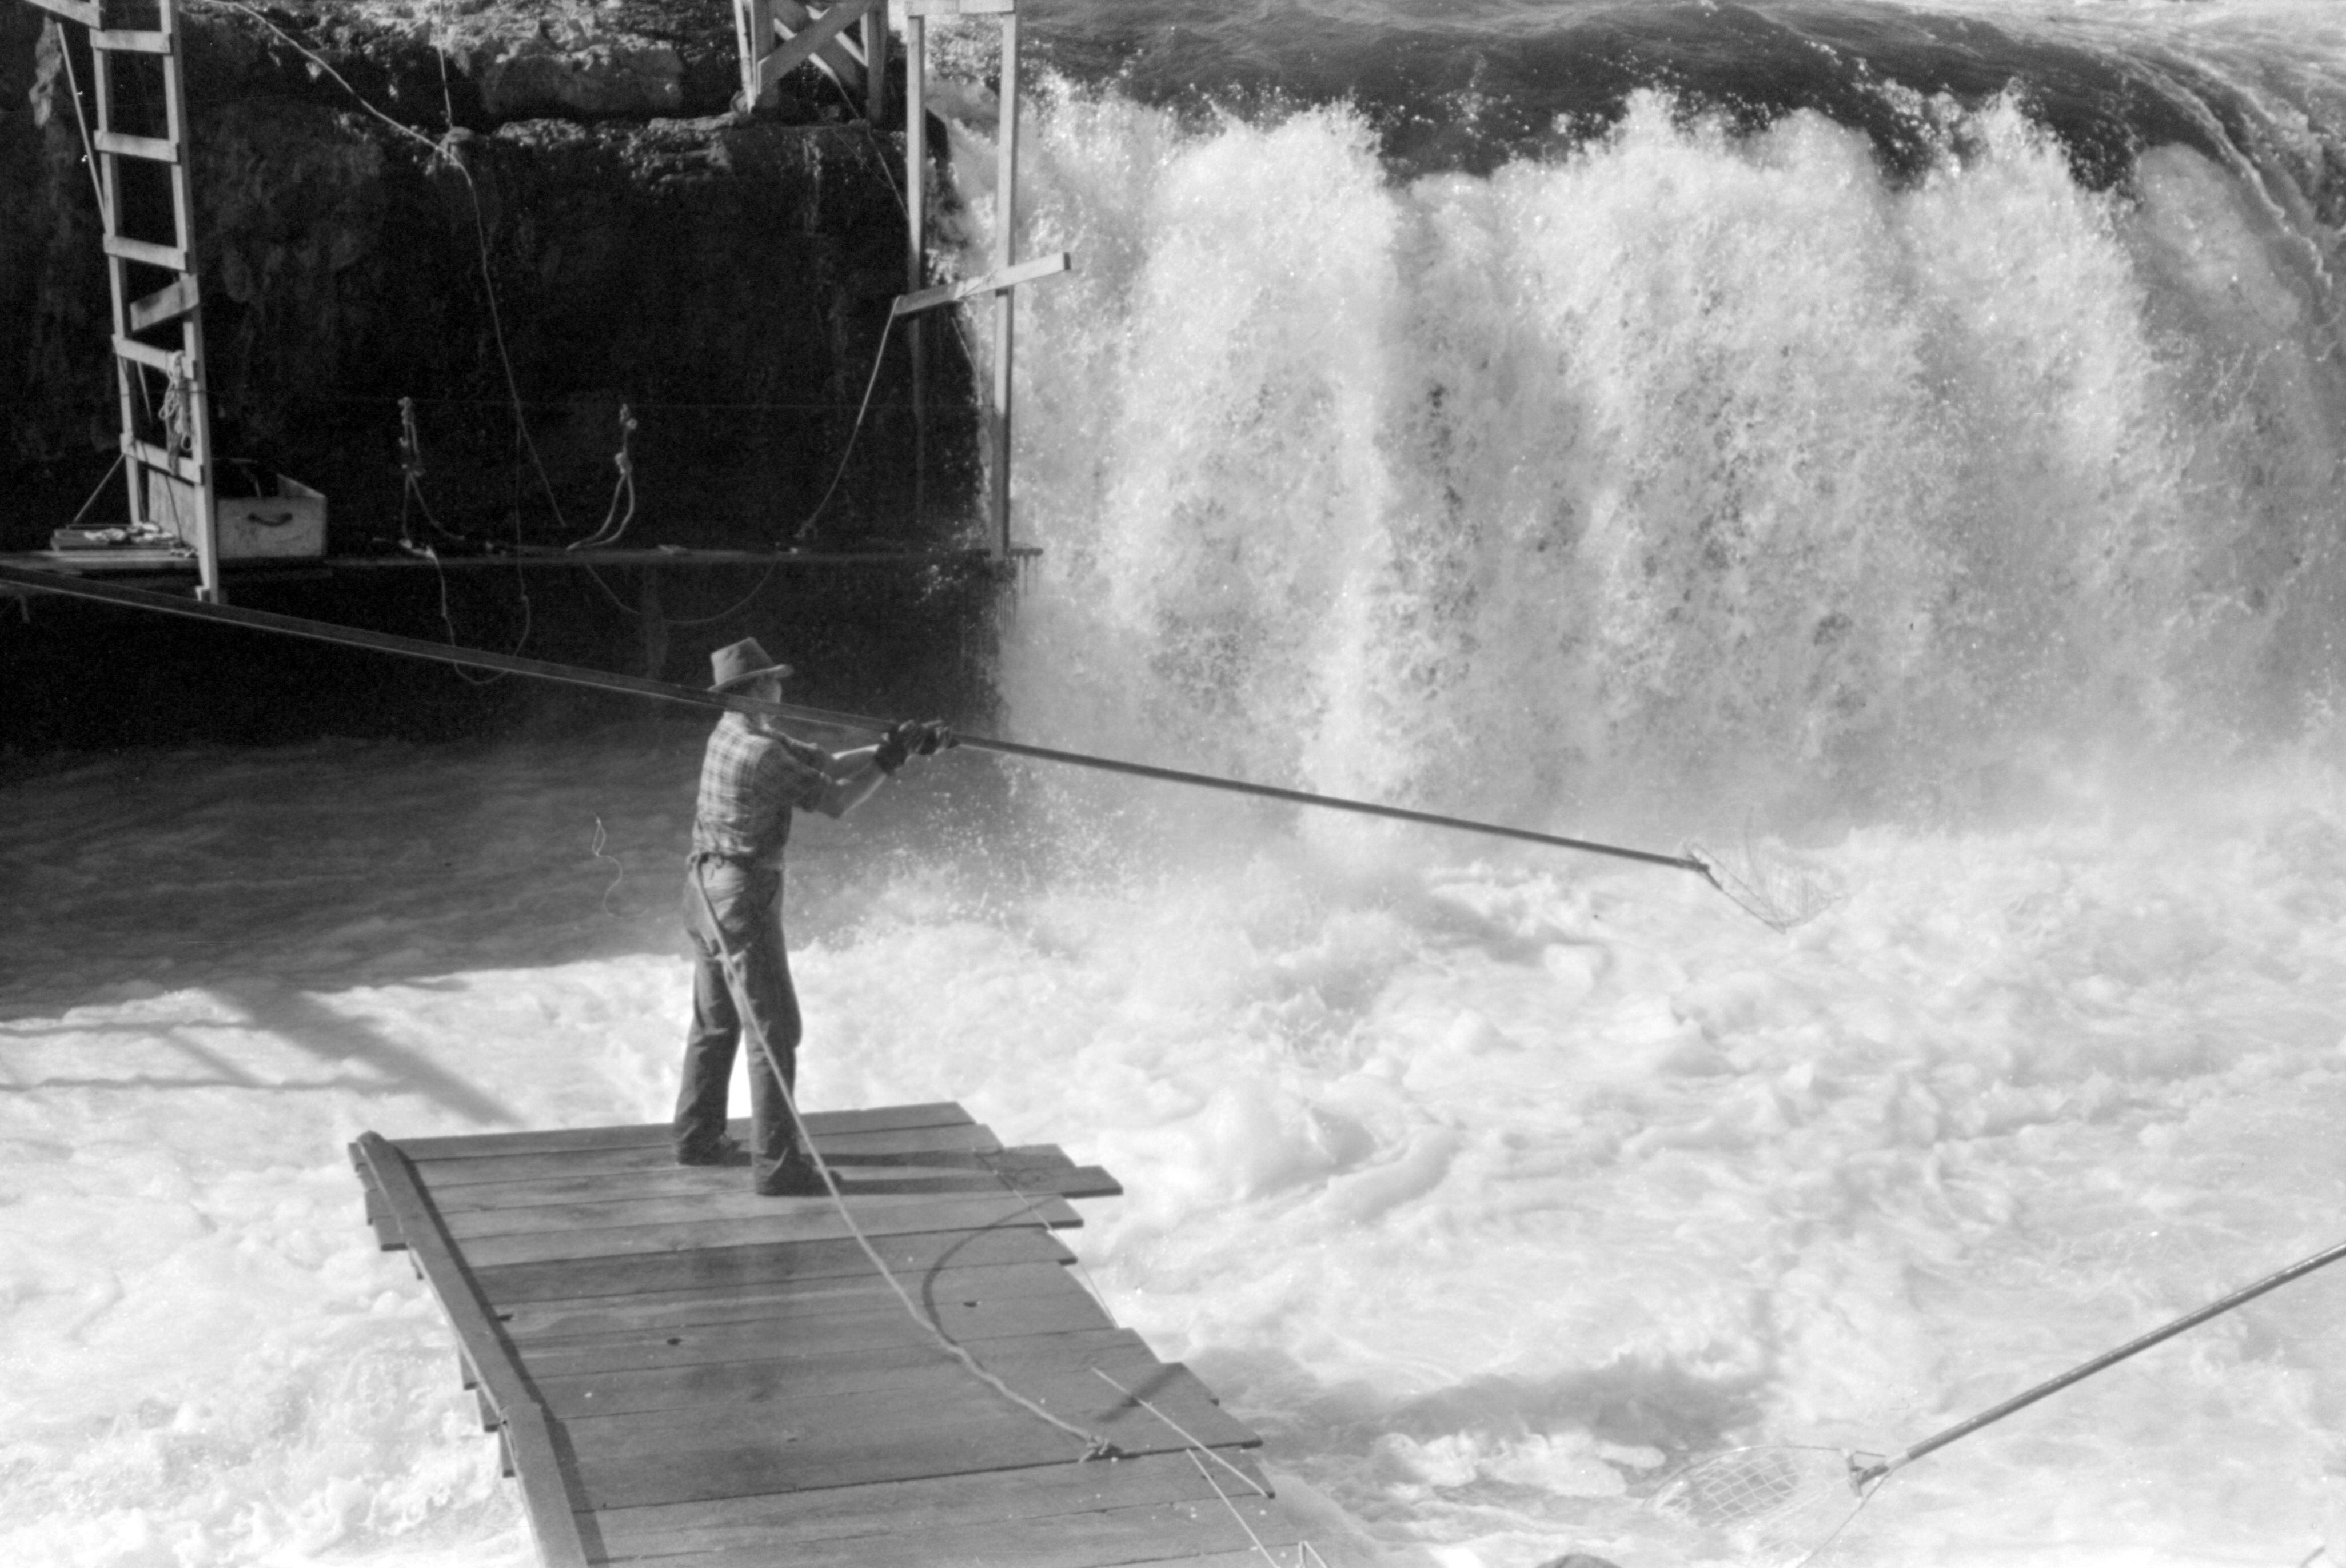 Native Americans fishing for salmon from traditional scaffolds at Celilo Falls, Oregon, 1941. The falls and traditional fishing grounds were flooded in 1957 by the opening of the floodgates of the newly completed Dalles Dam.

  Reference Link:
   https://www.loc.gov/pictures/item/2017744243/